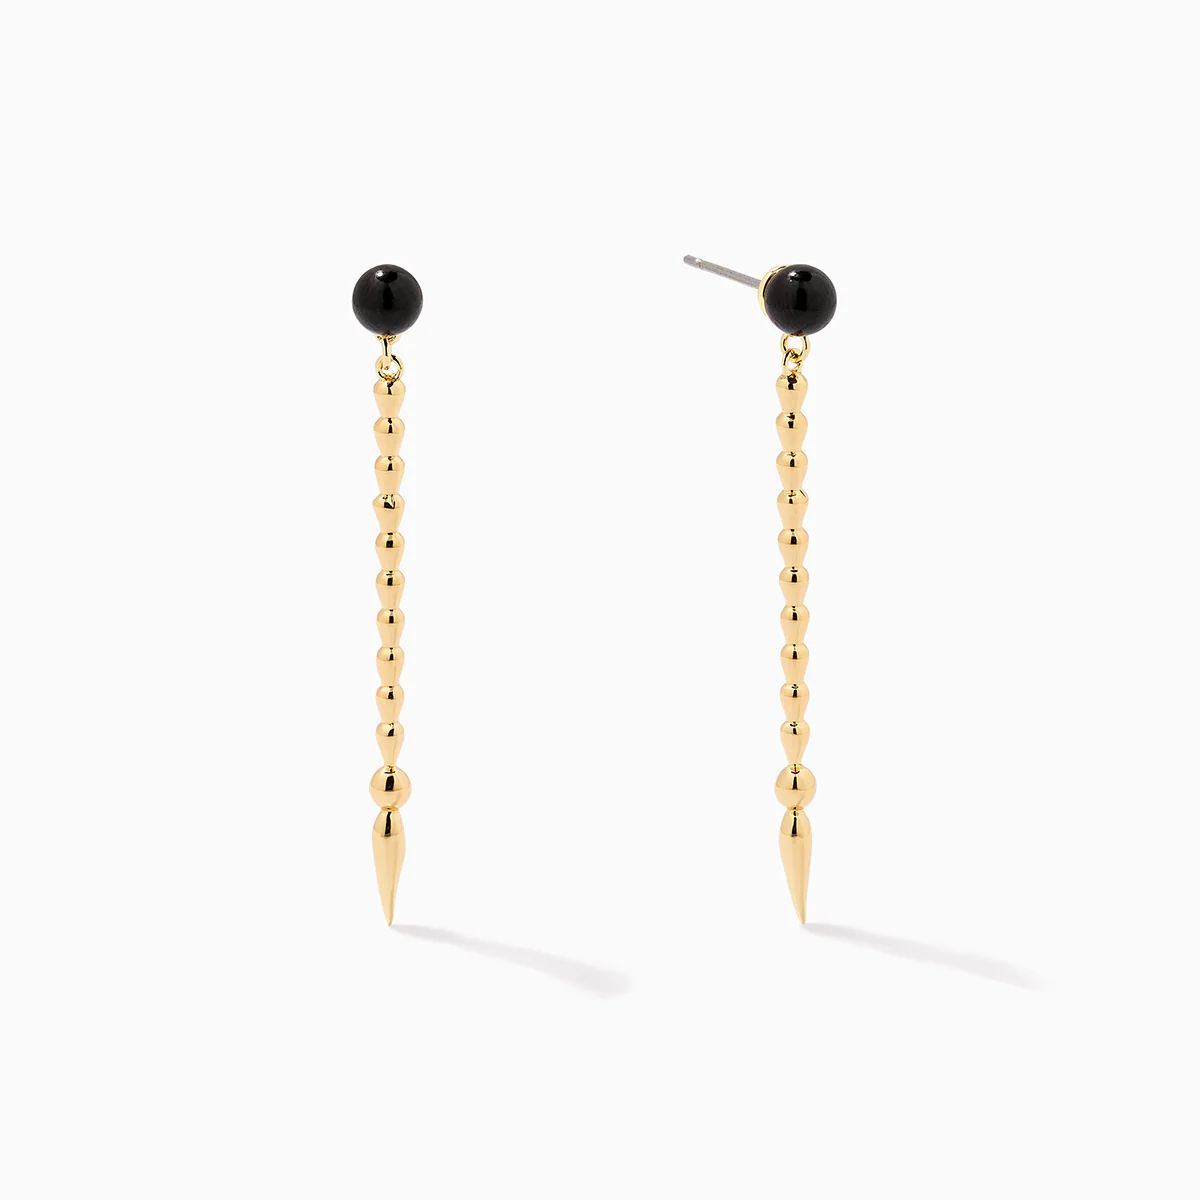 Down to It Earrings | Uncommon James